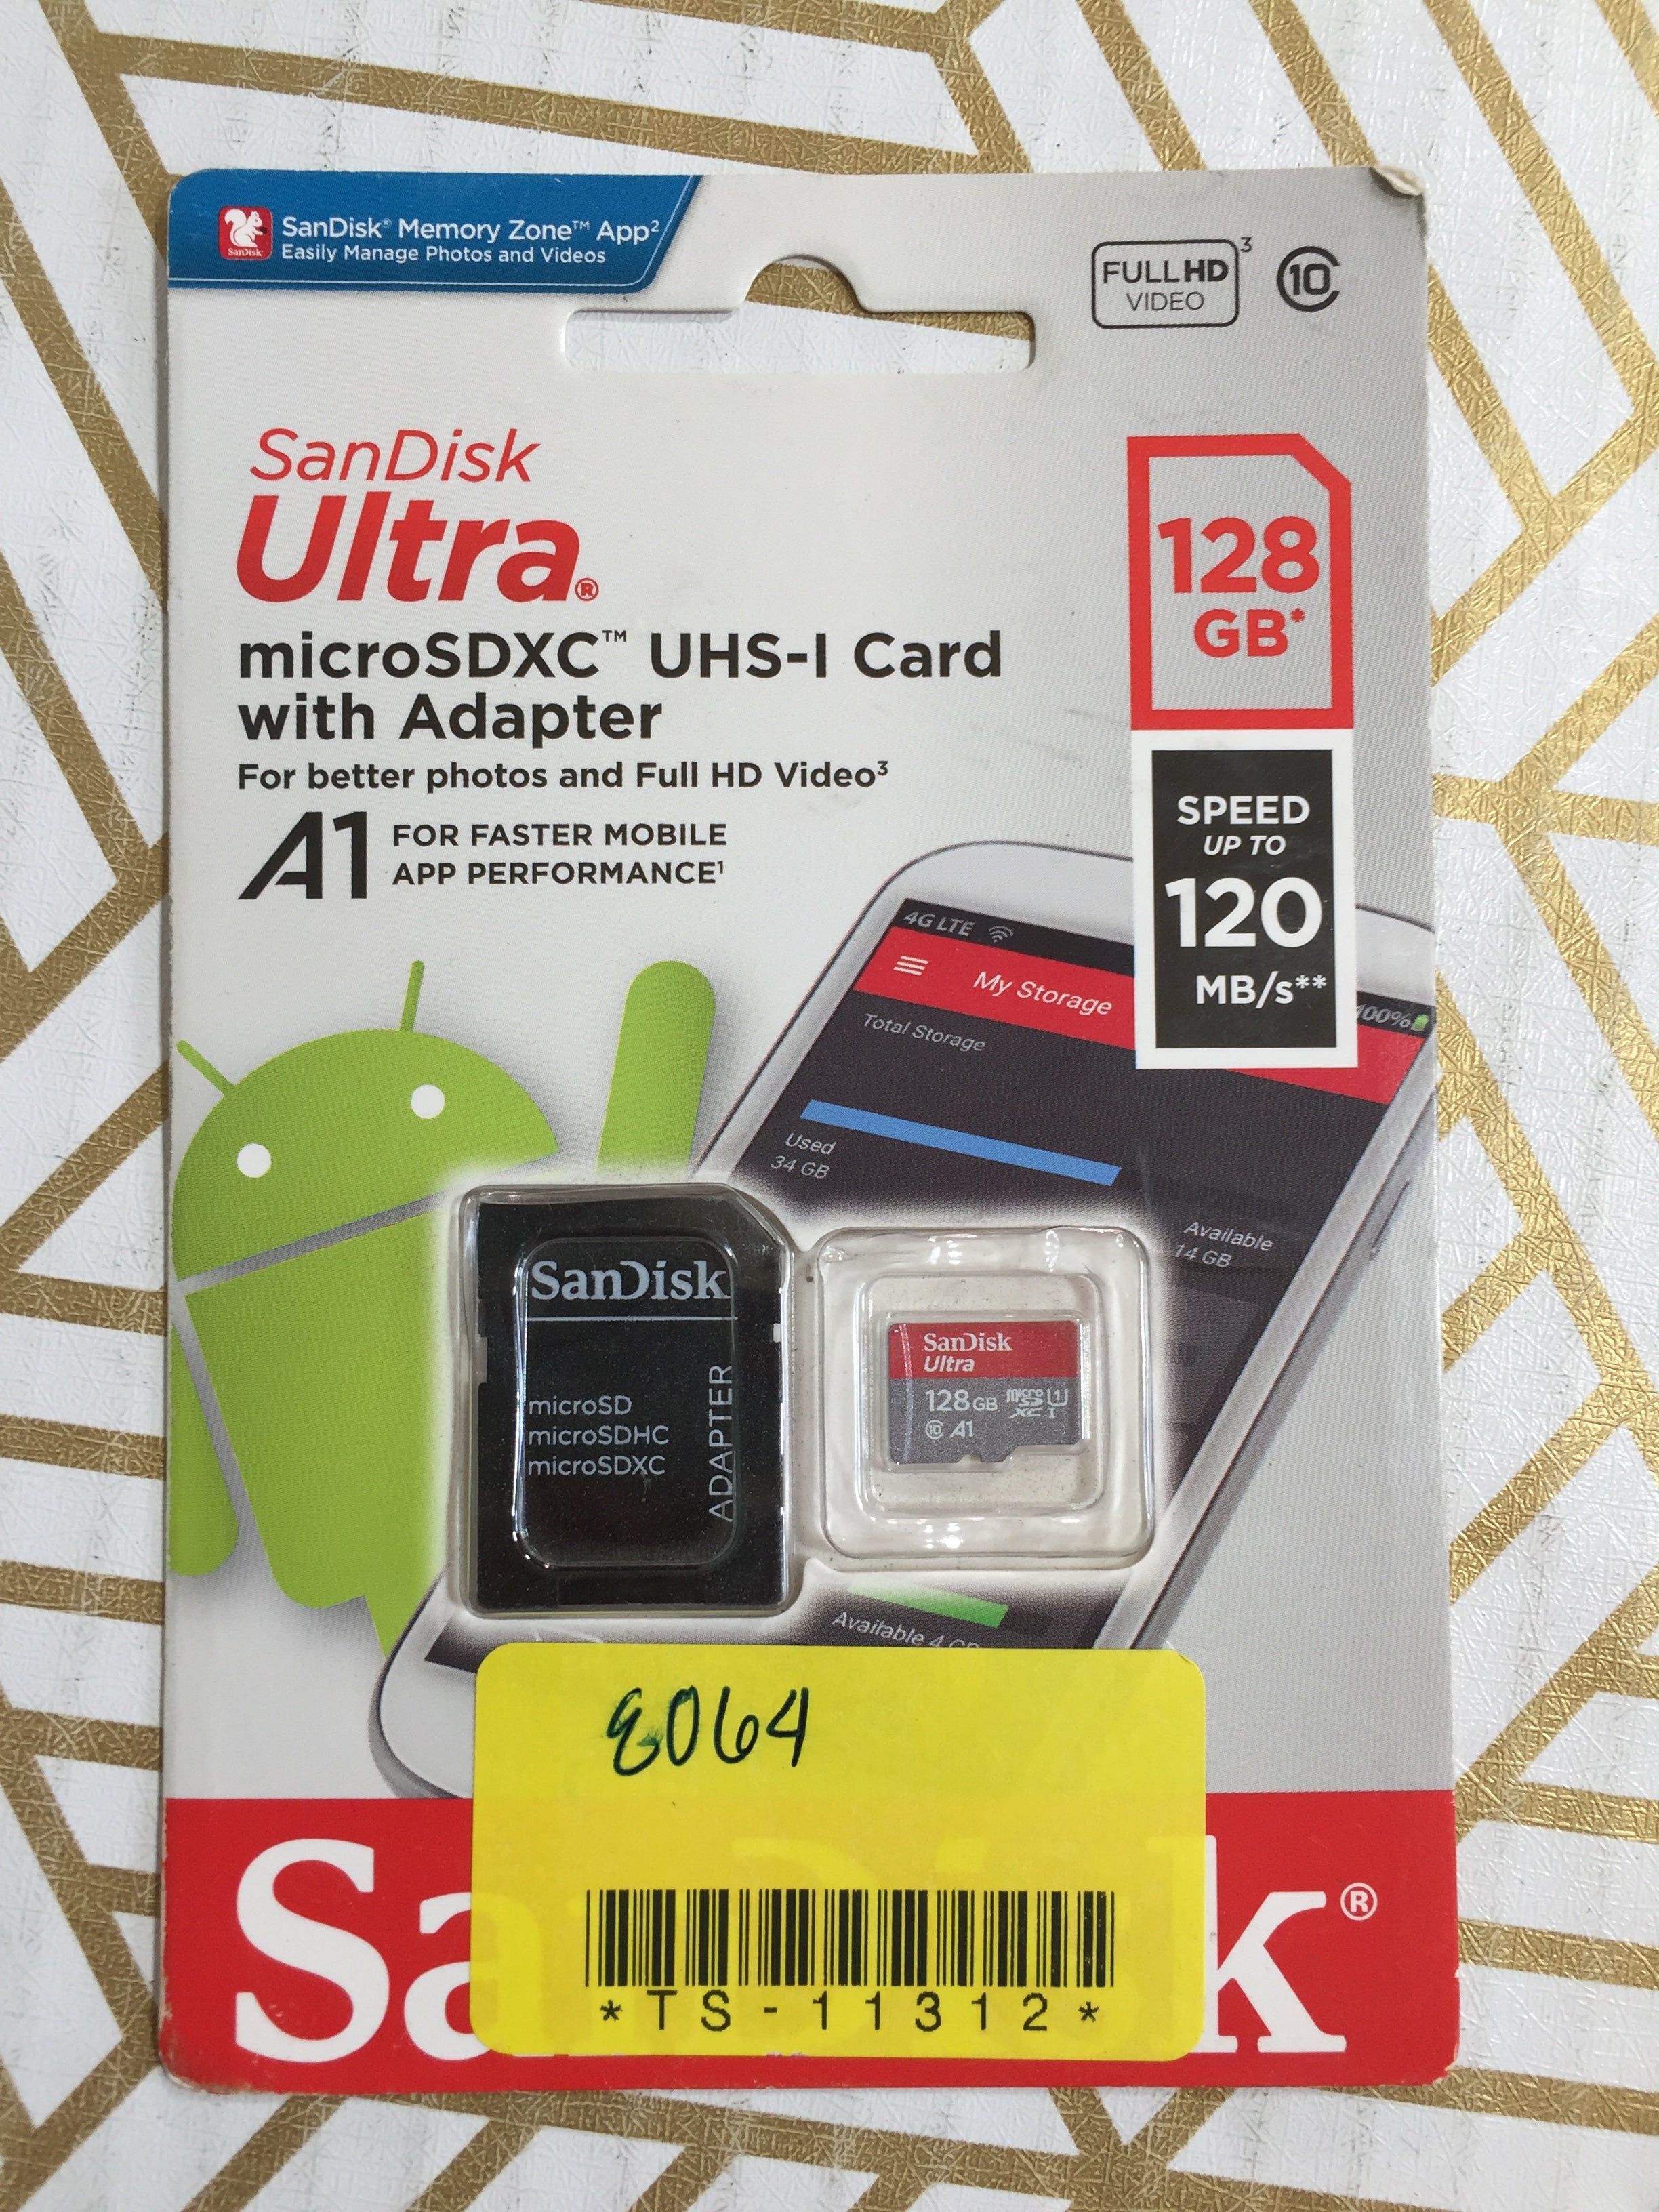 SanDisk 128GB Ultra microSDXC UHS-I Memory Card with Adapter - 120MB/s (7761675354350)